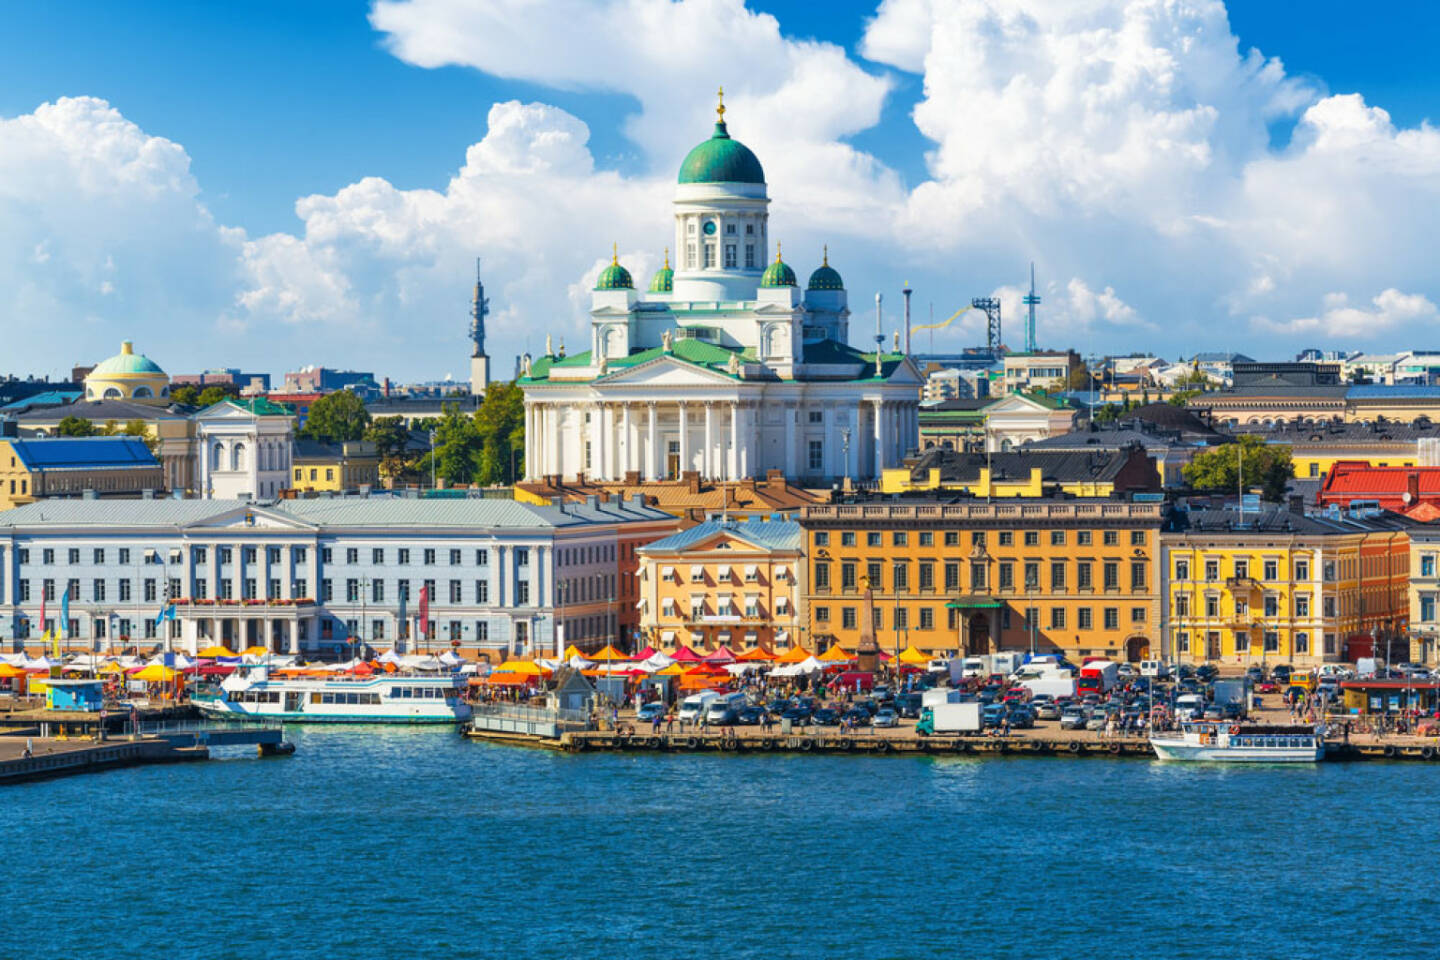 Helsinki, Finnland, http://www.shutterstock.com/de/pic-154741178/stock-photo-scenic-summer-panorama-of-the-market-square-kauppatori-at-the-old-town-pier-in-helsinki-finland.html 